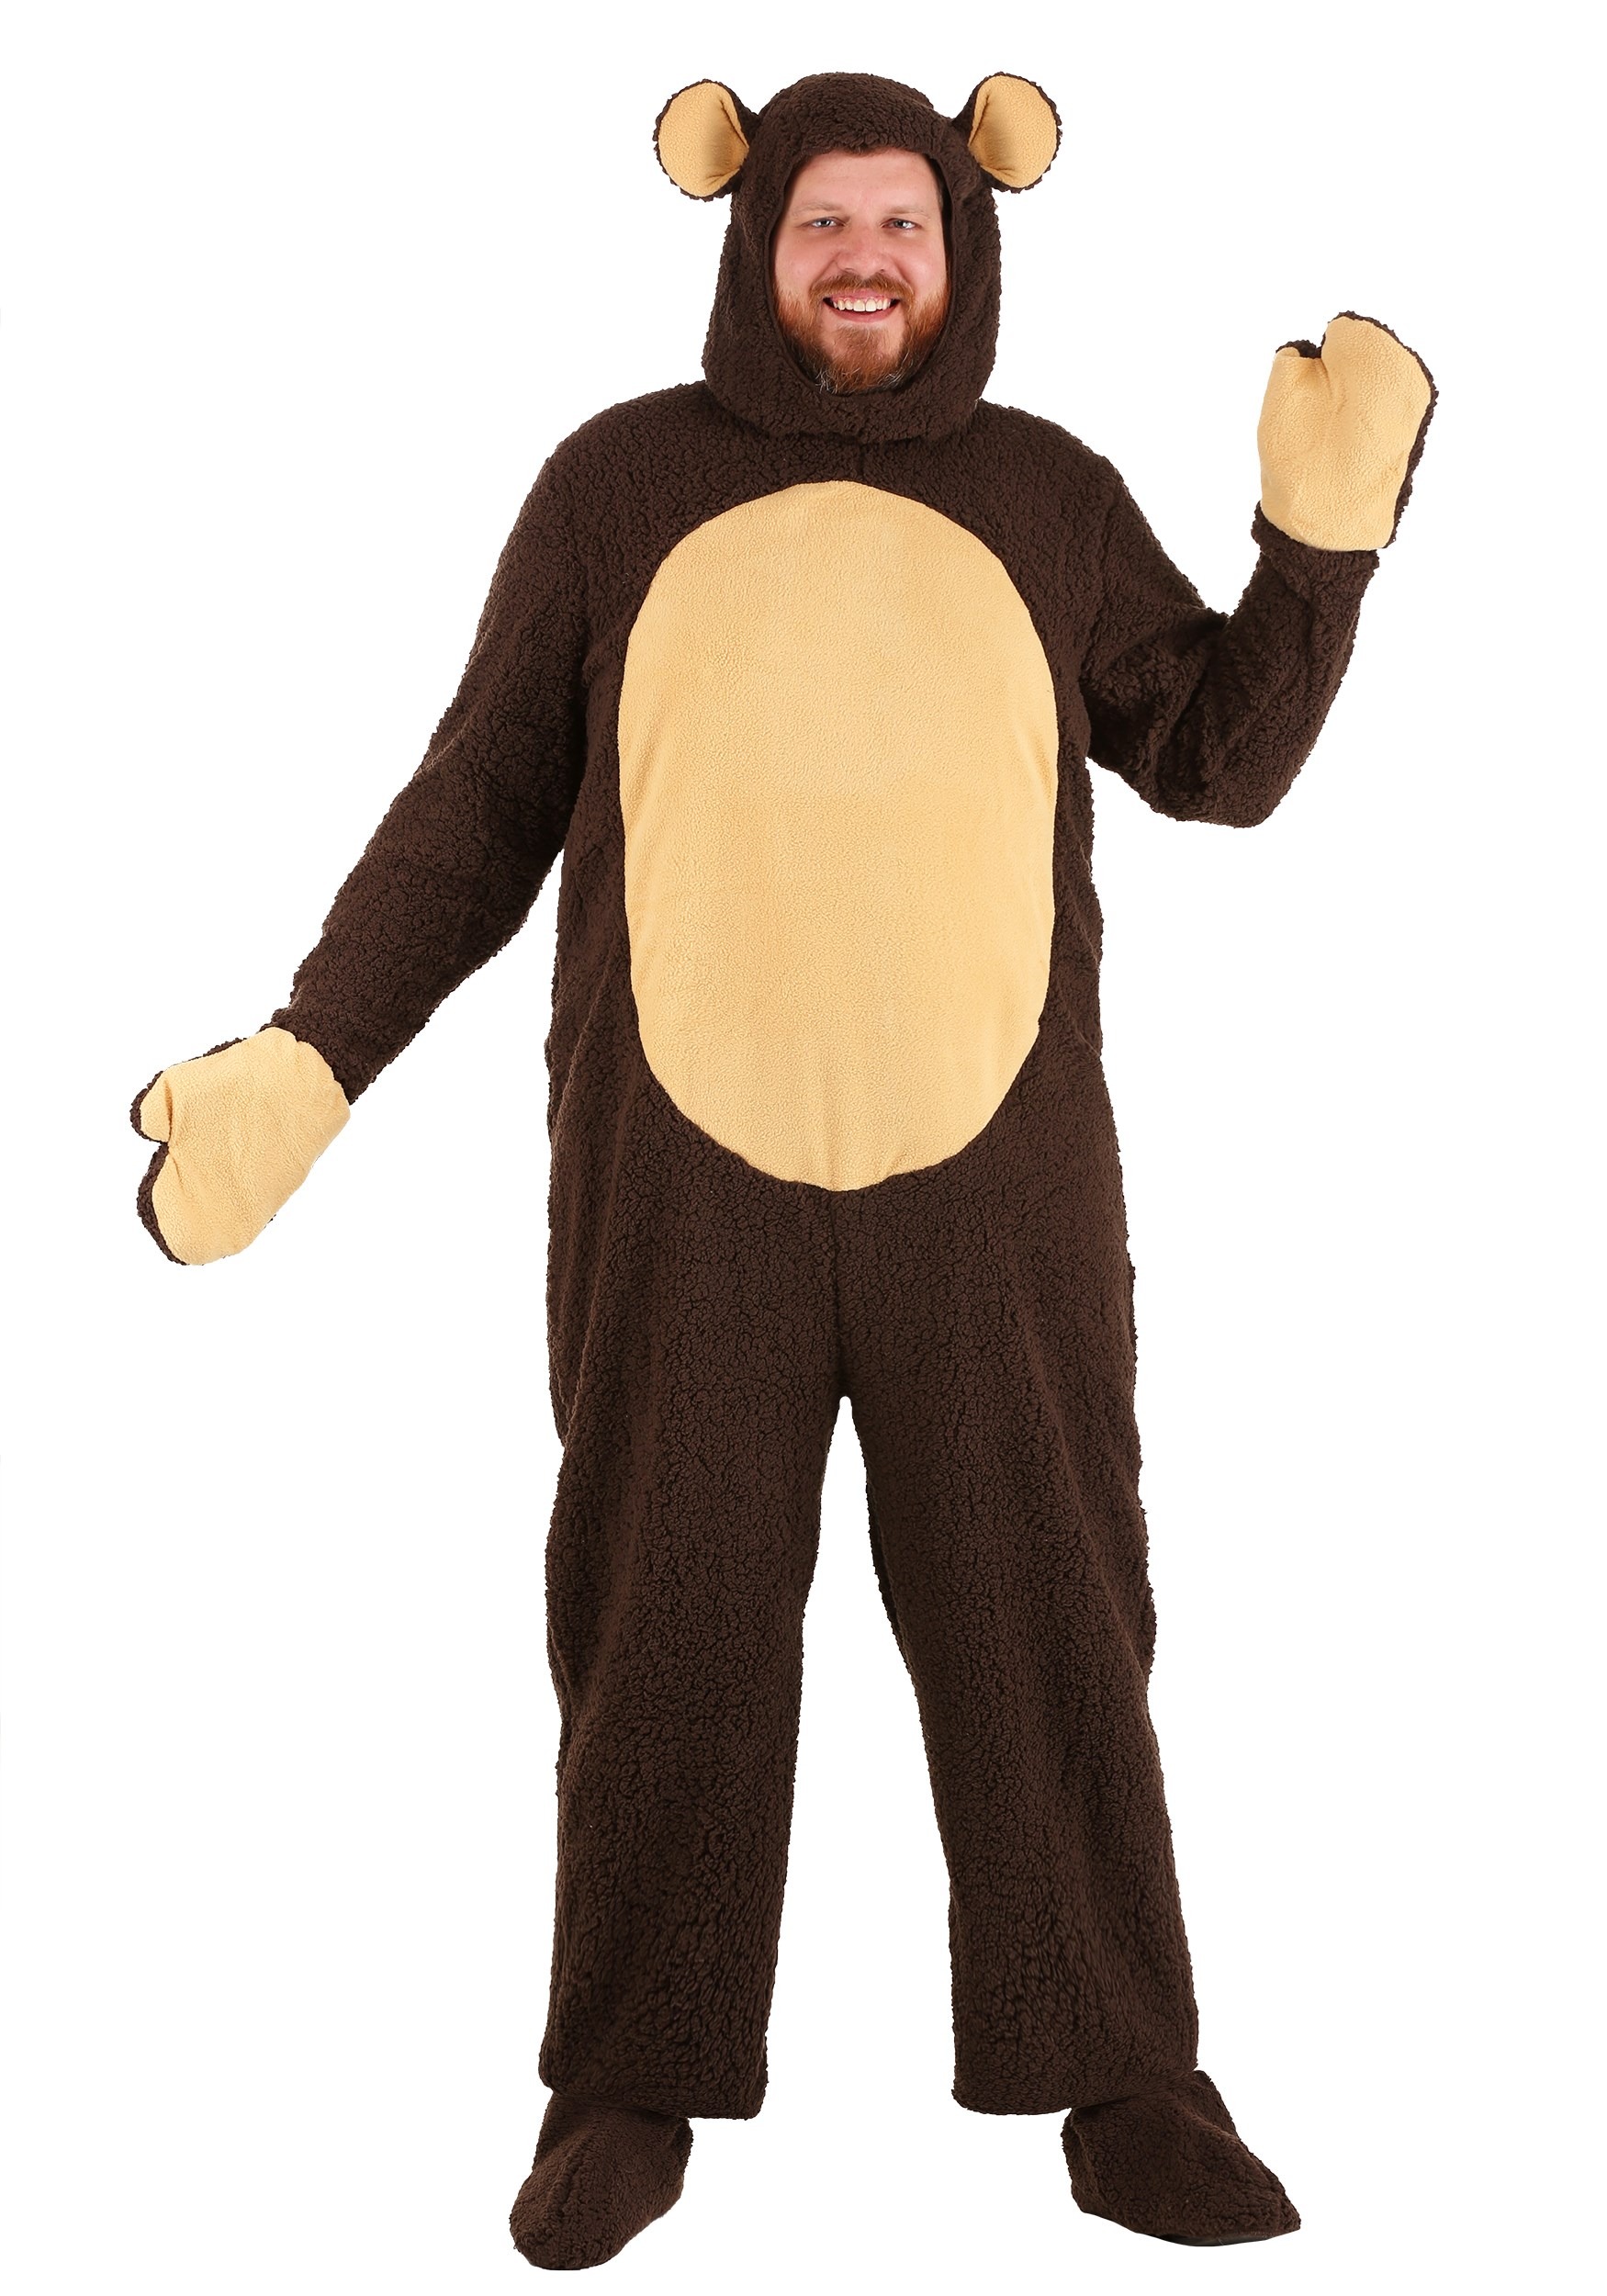 Photos - Fancy Dress BEAR FUN Costumes Storybook  Costume for Adults Brown/Beige FUN2092 